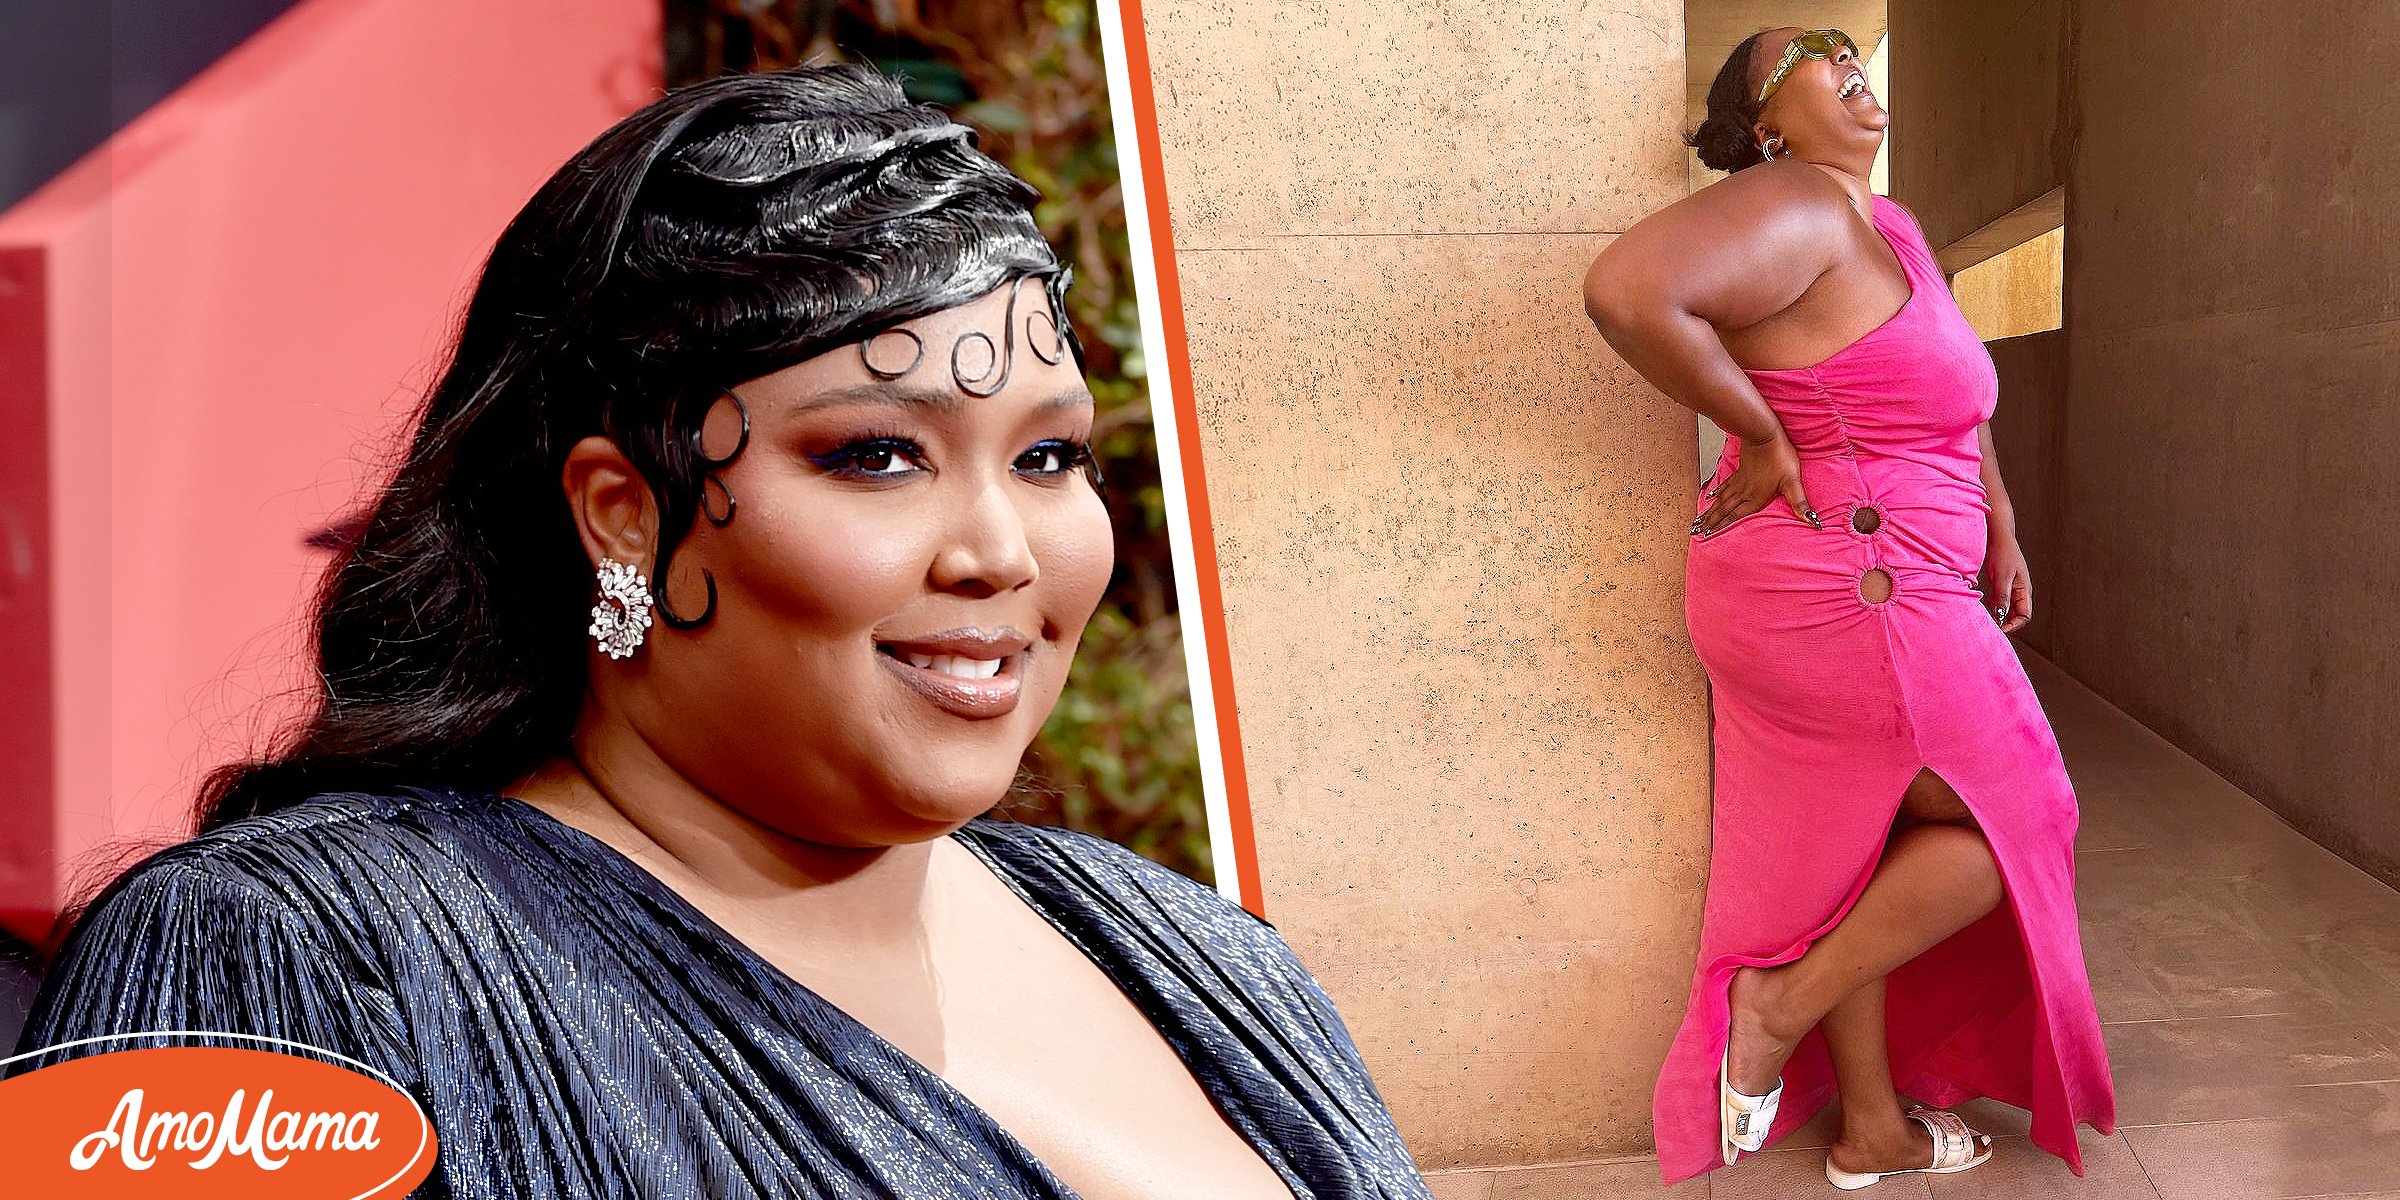 Lizzo's Weight Gain & Choice to Celebrate Her Body — A Look at the